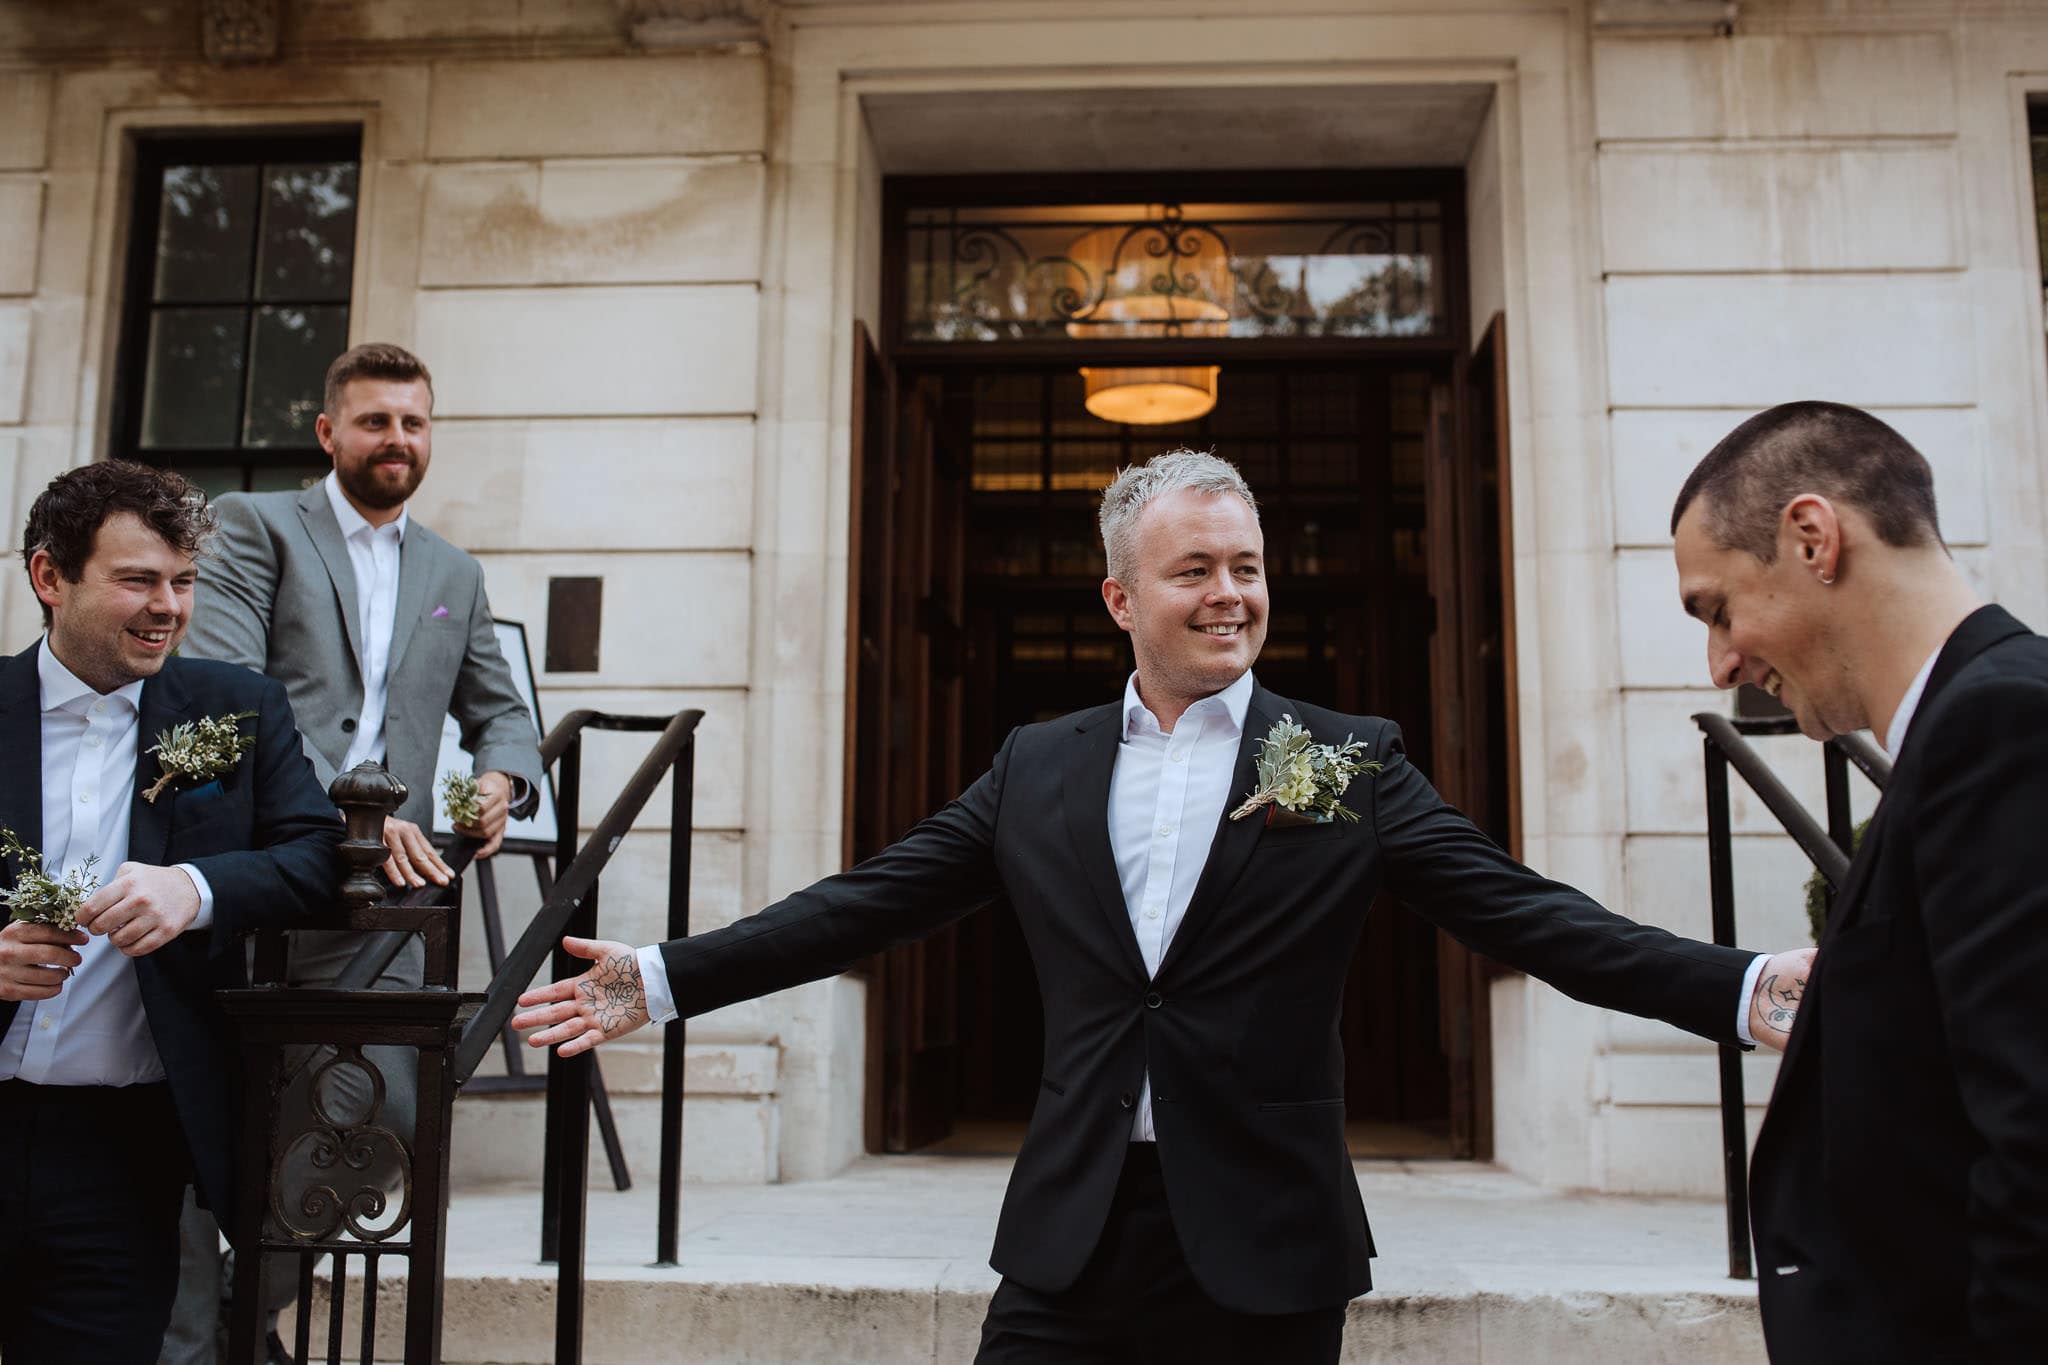 groom on the steps of Town Hall Hotel Wedding, London